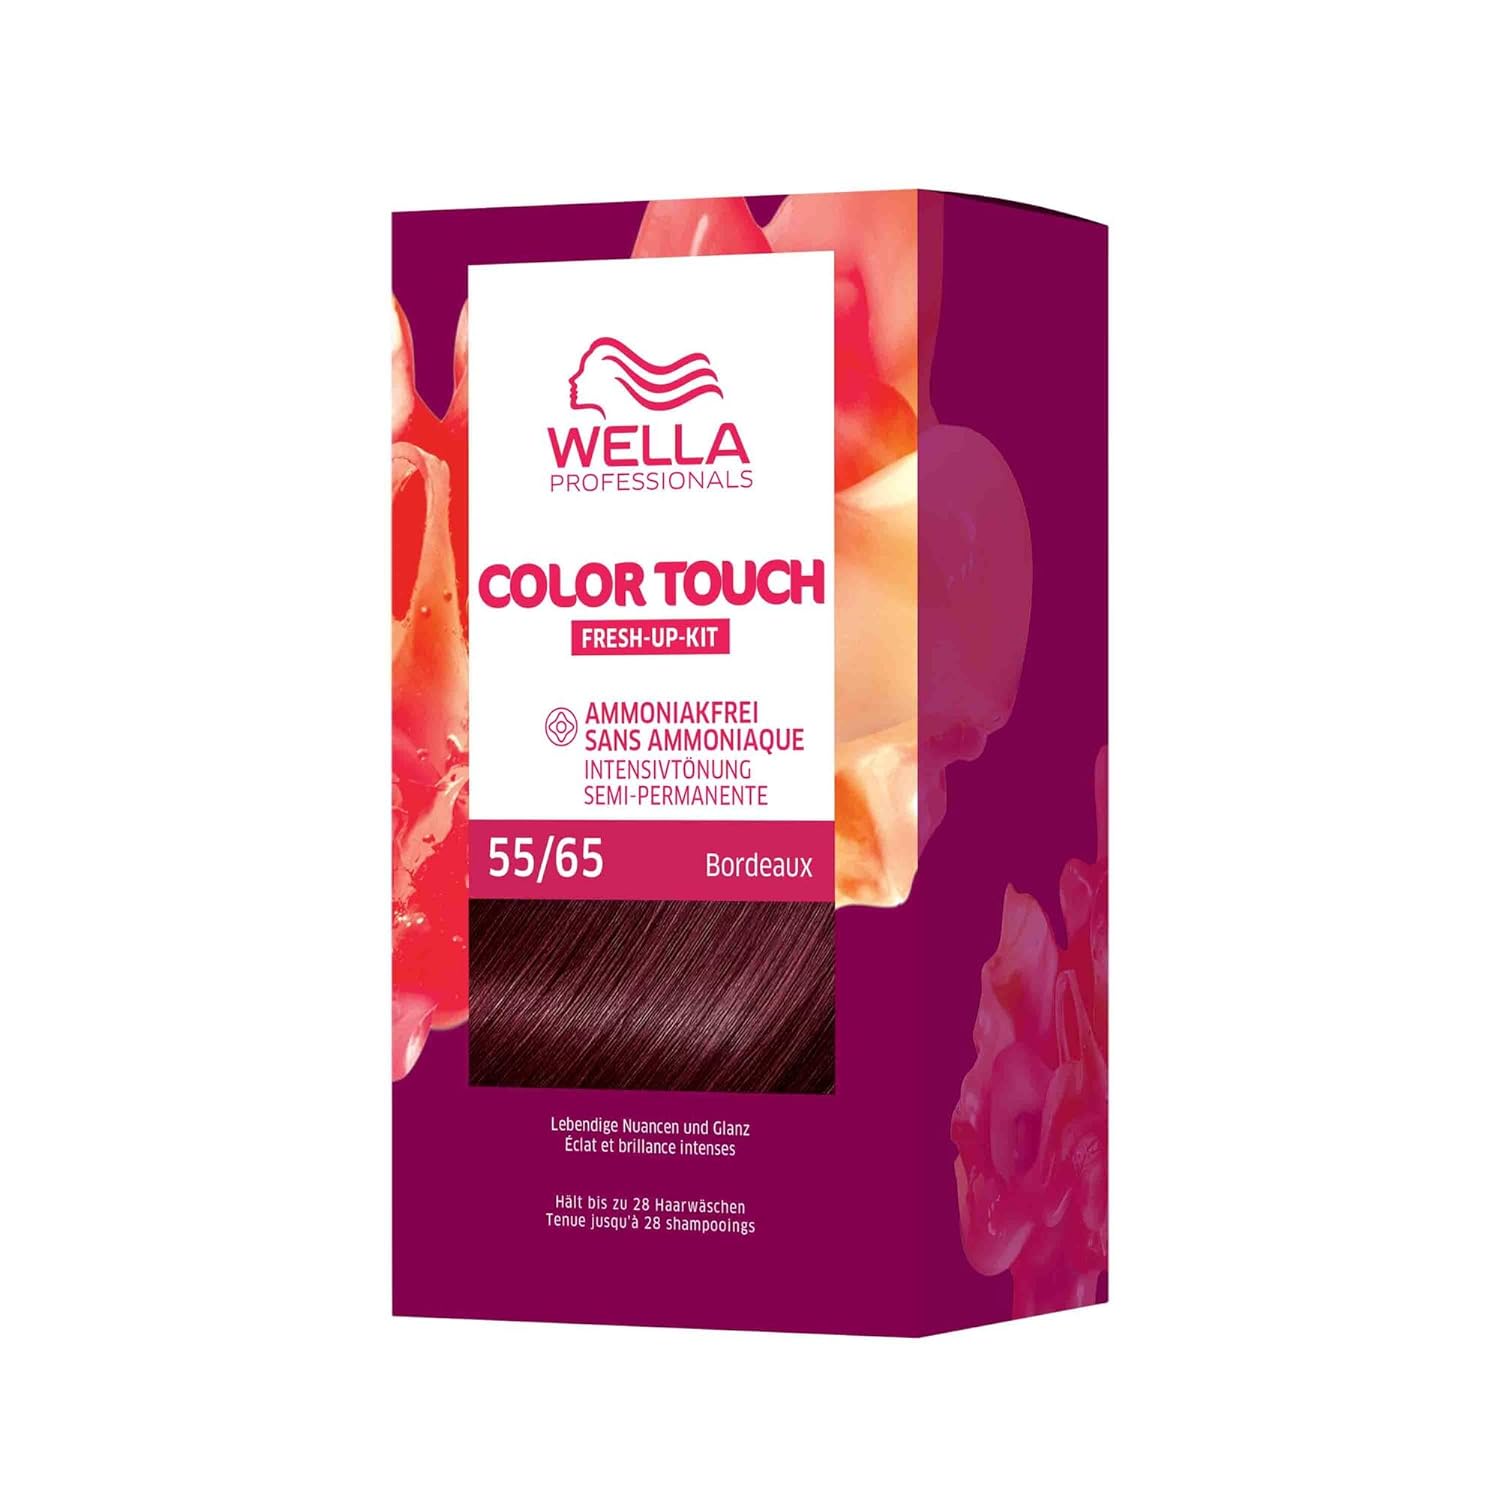 Wella Professionals Color Touch Semi -Permanent Hair Color Without Ammonia - Hair Dye for Color Restoration and Gray Hair Coverage - Root Kit Including Hair Mask